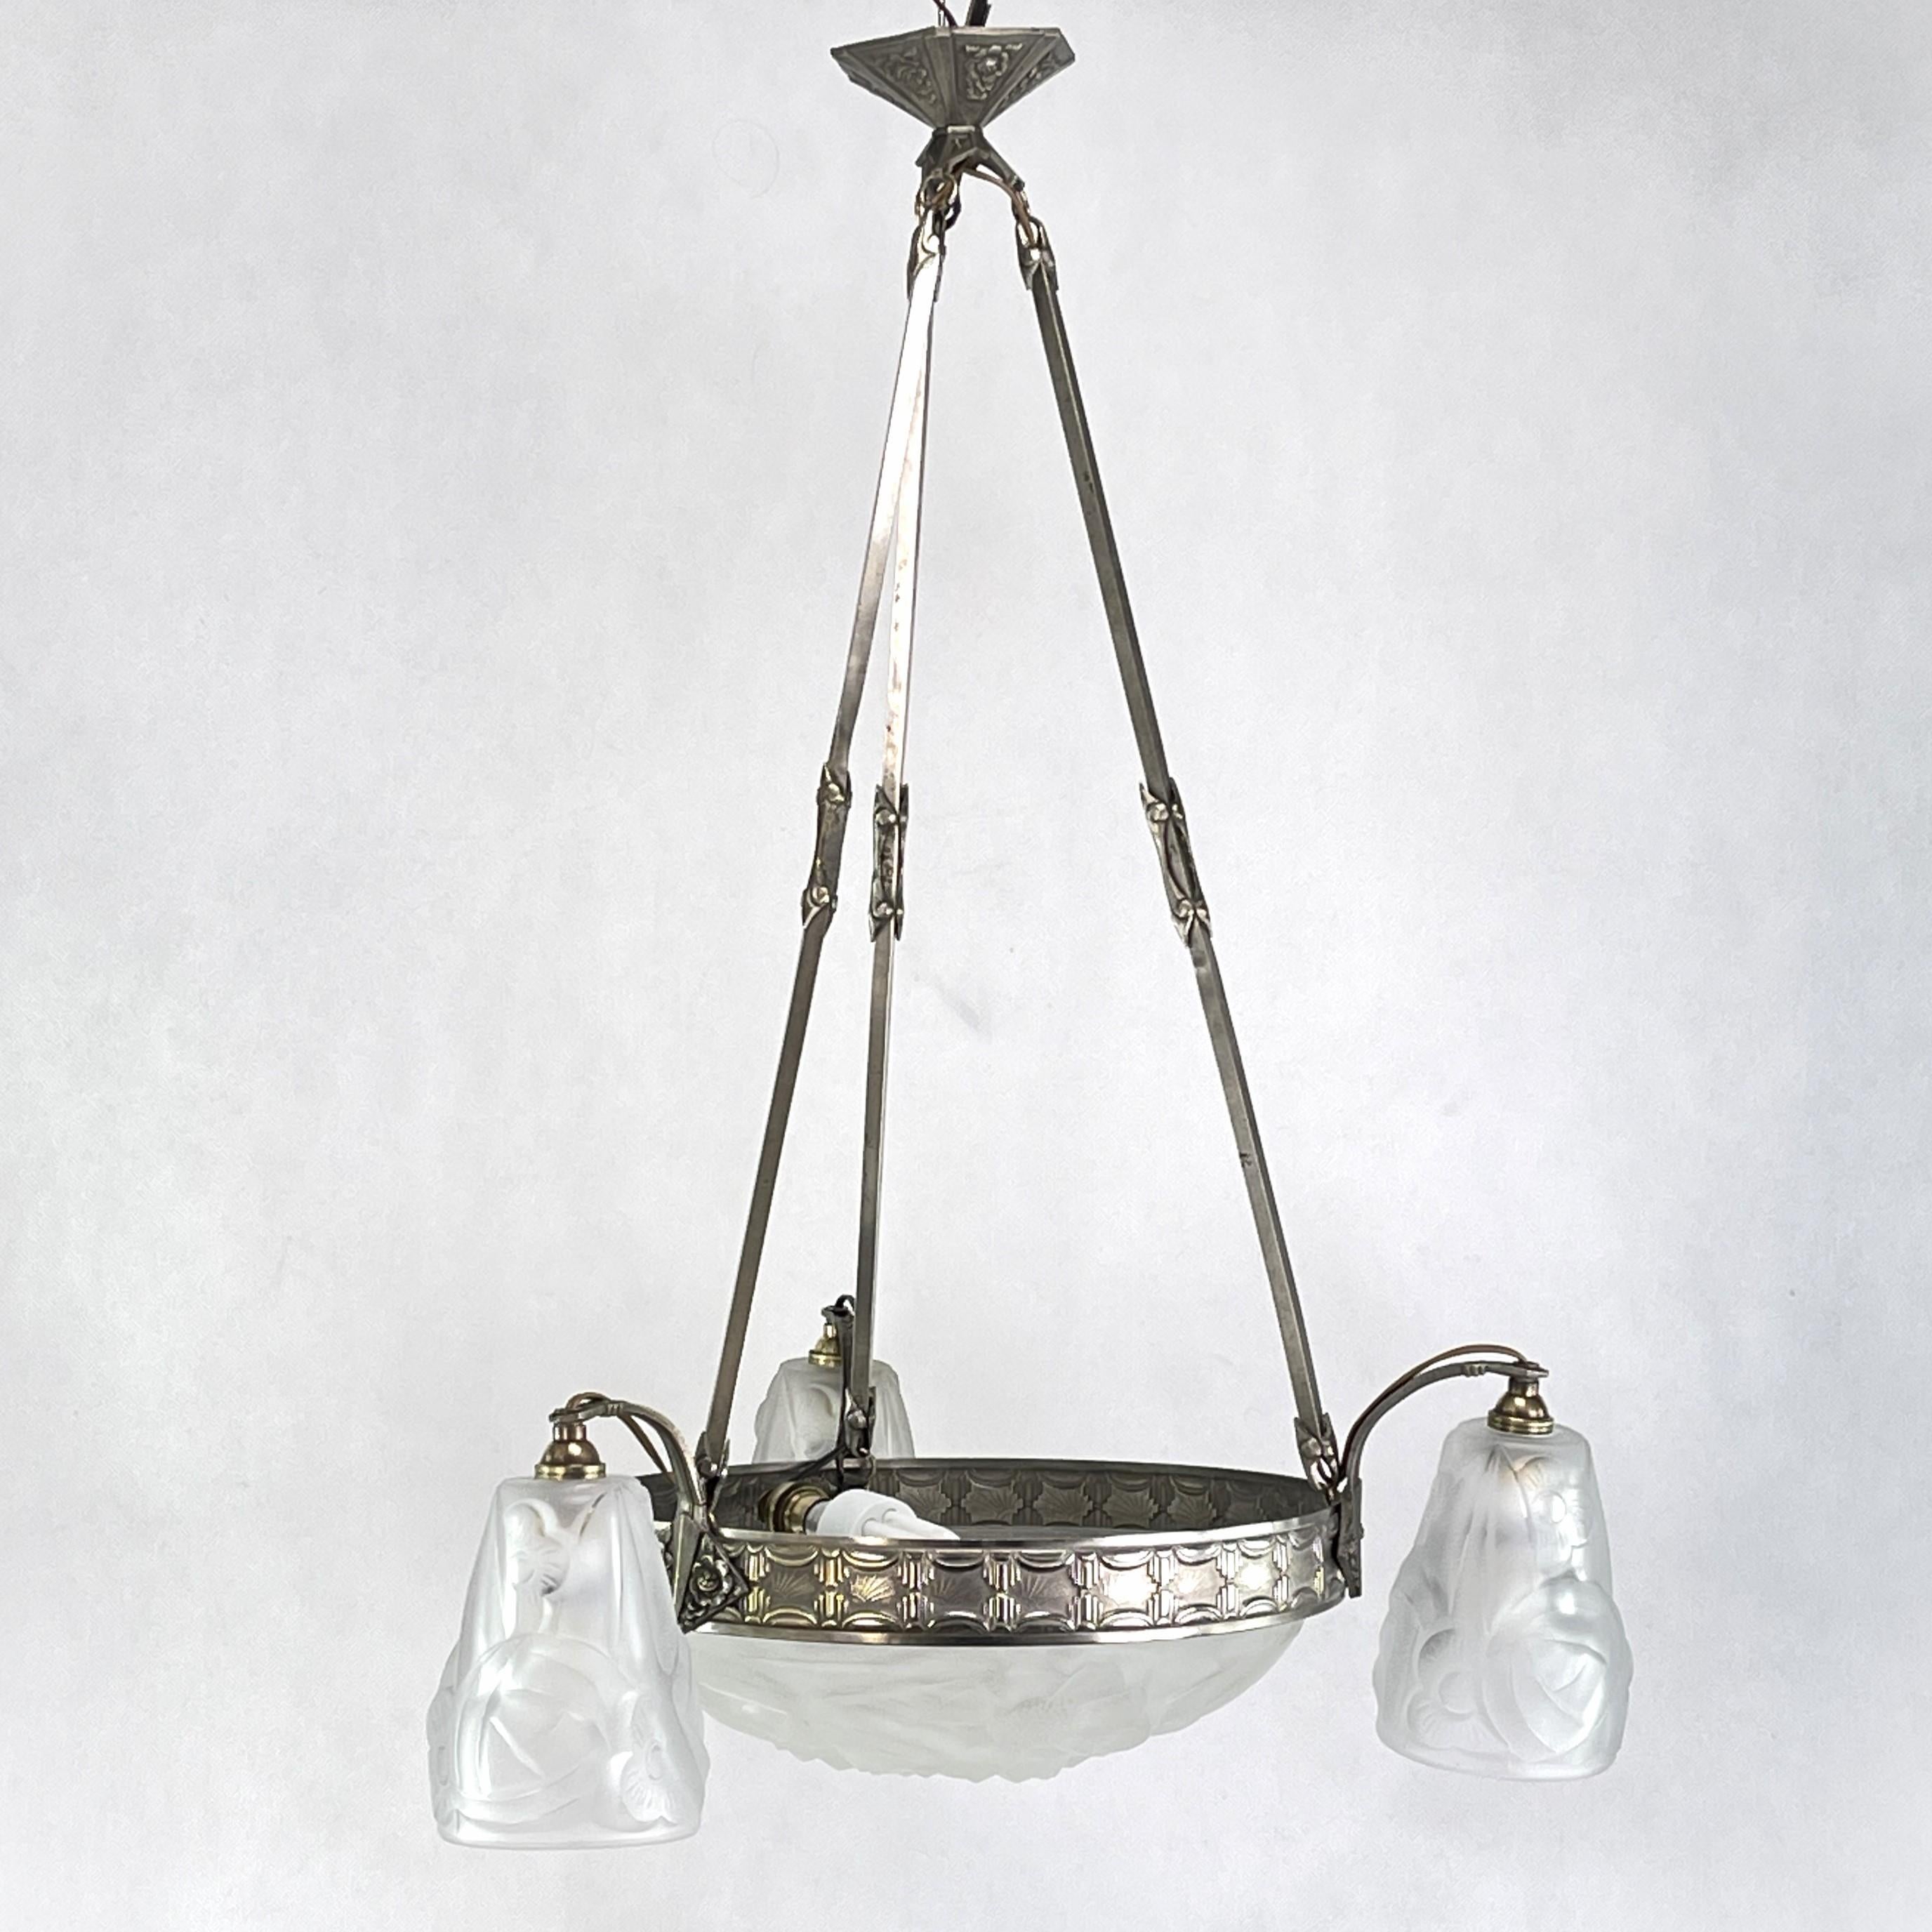 20th Century Art Deco Chandelier Hanging Lamp by Dégue, 1930s